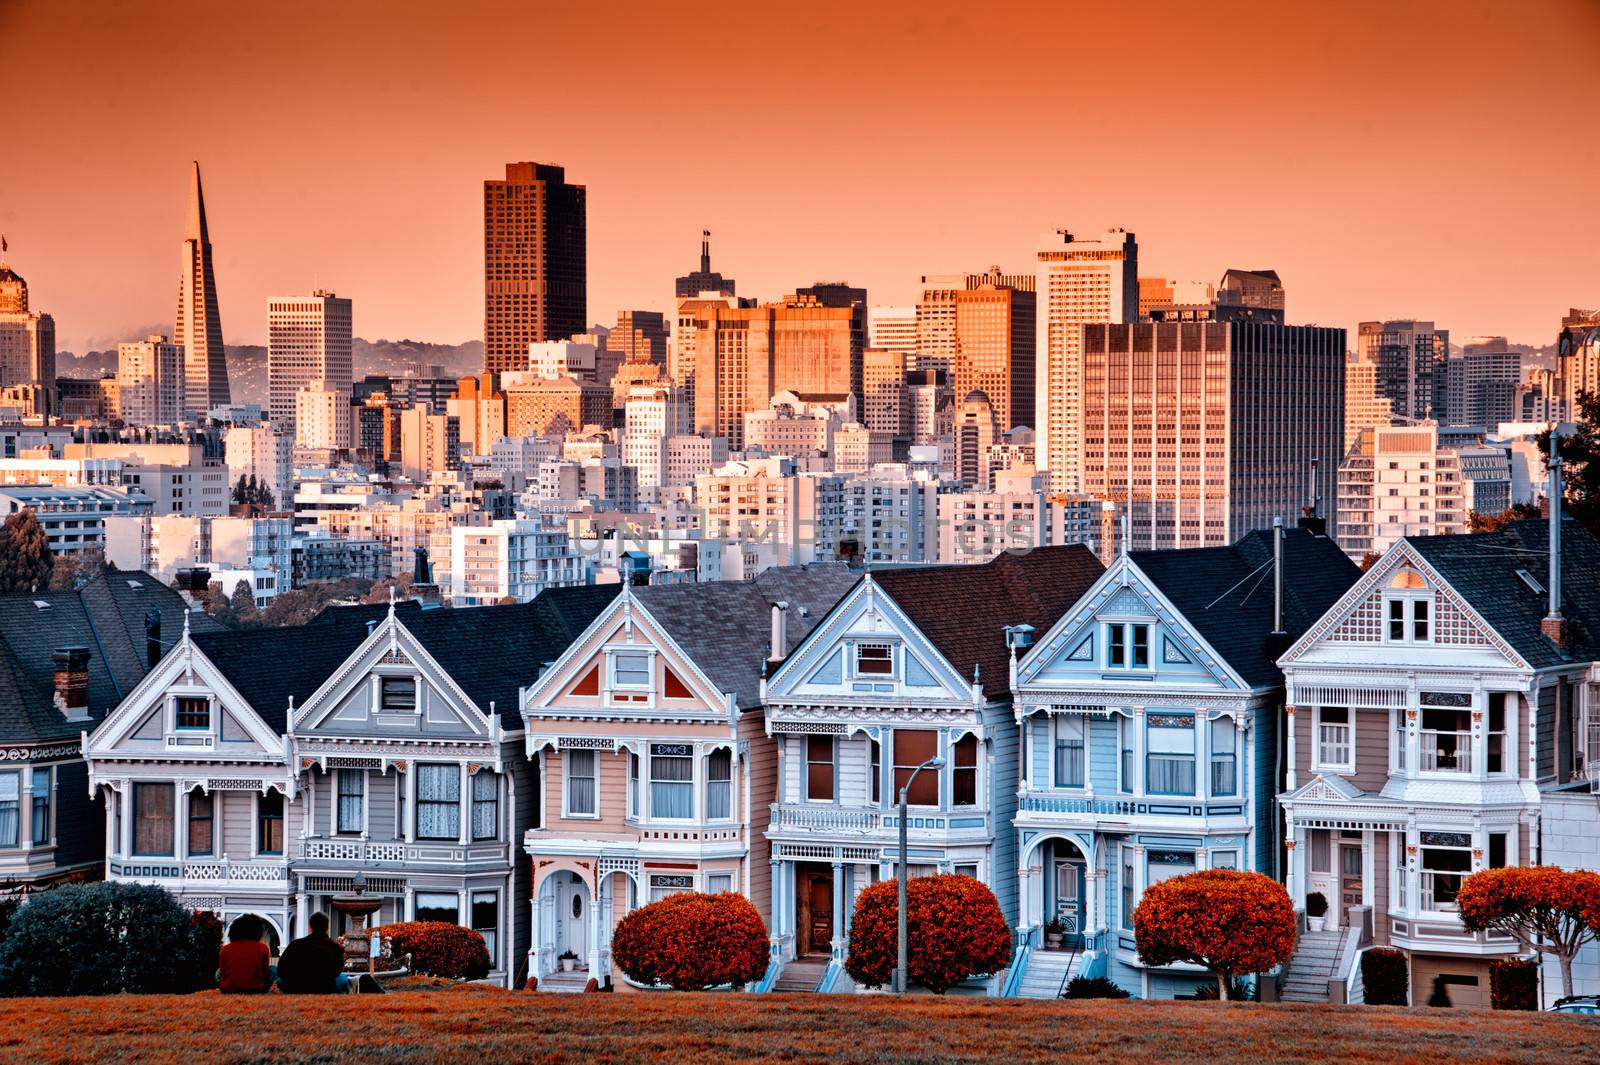 Row of colourful Victorian homes on Steiner Street with the San Francisco skyline behind.